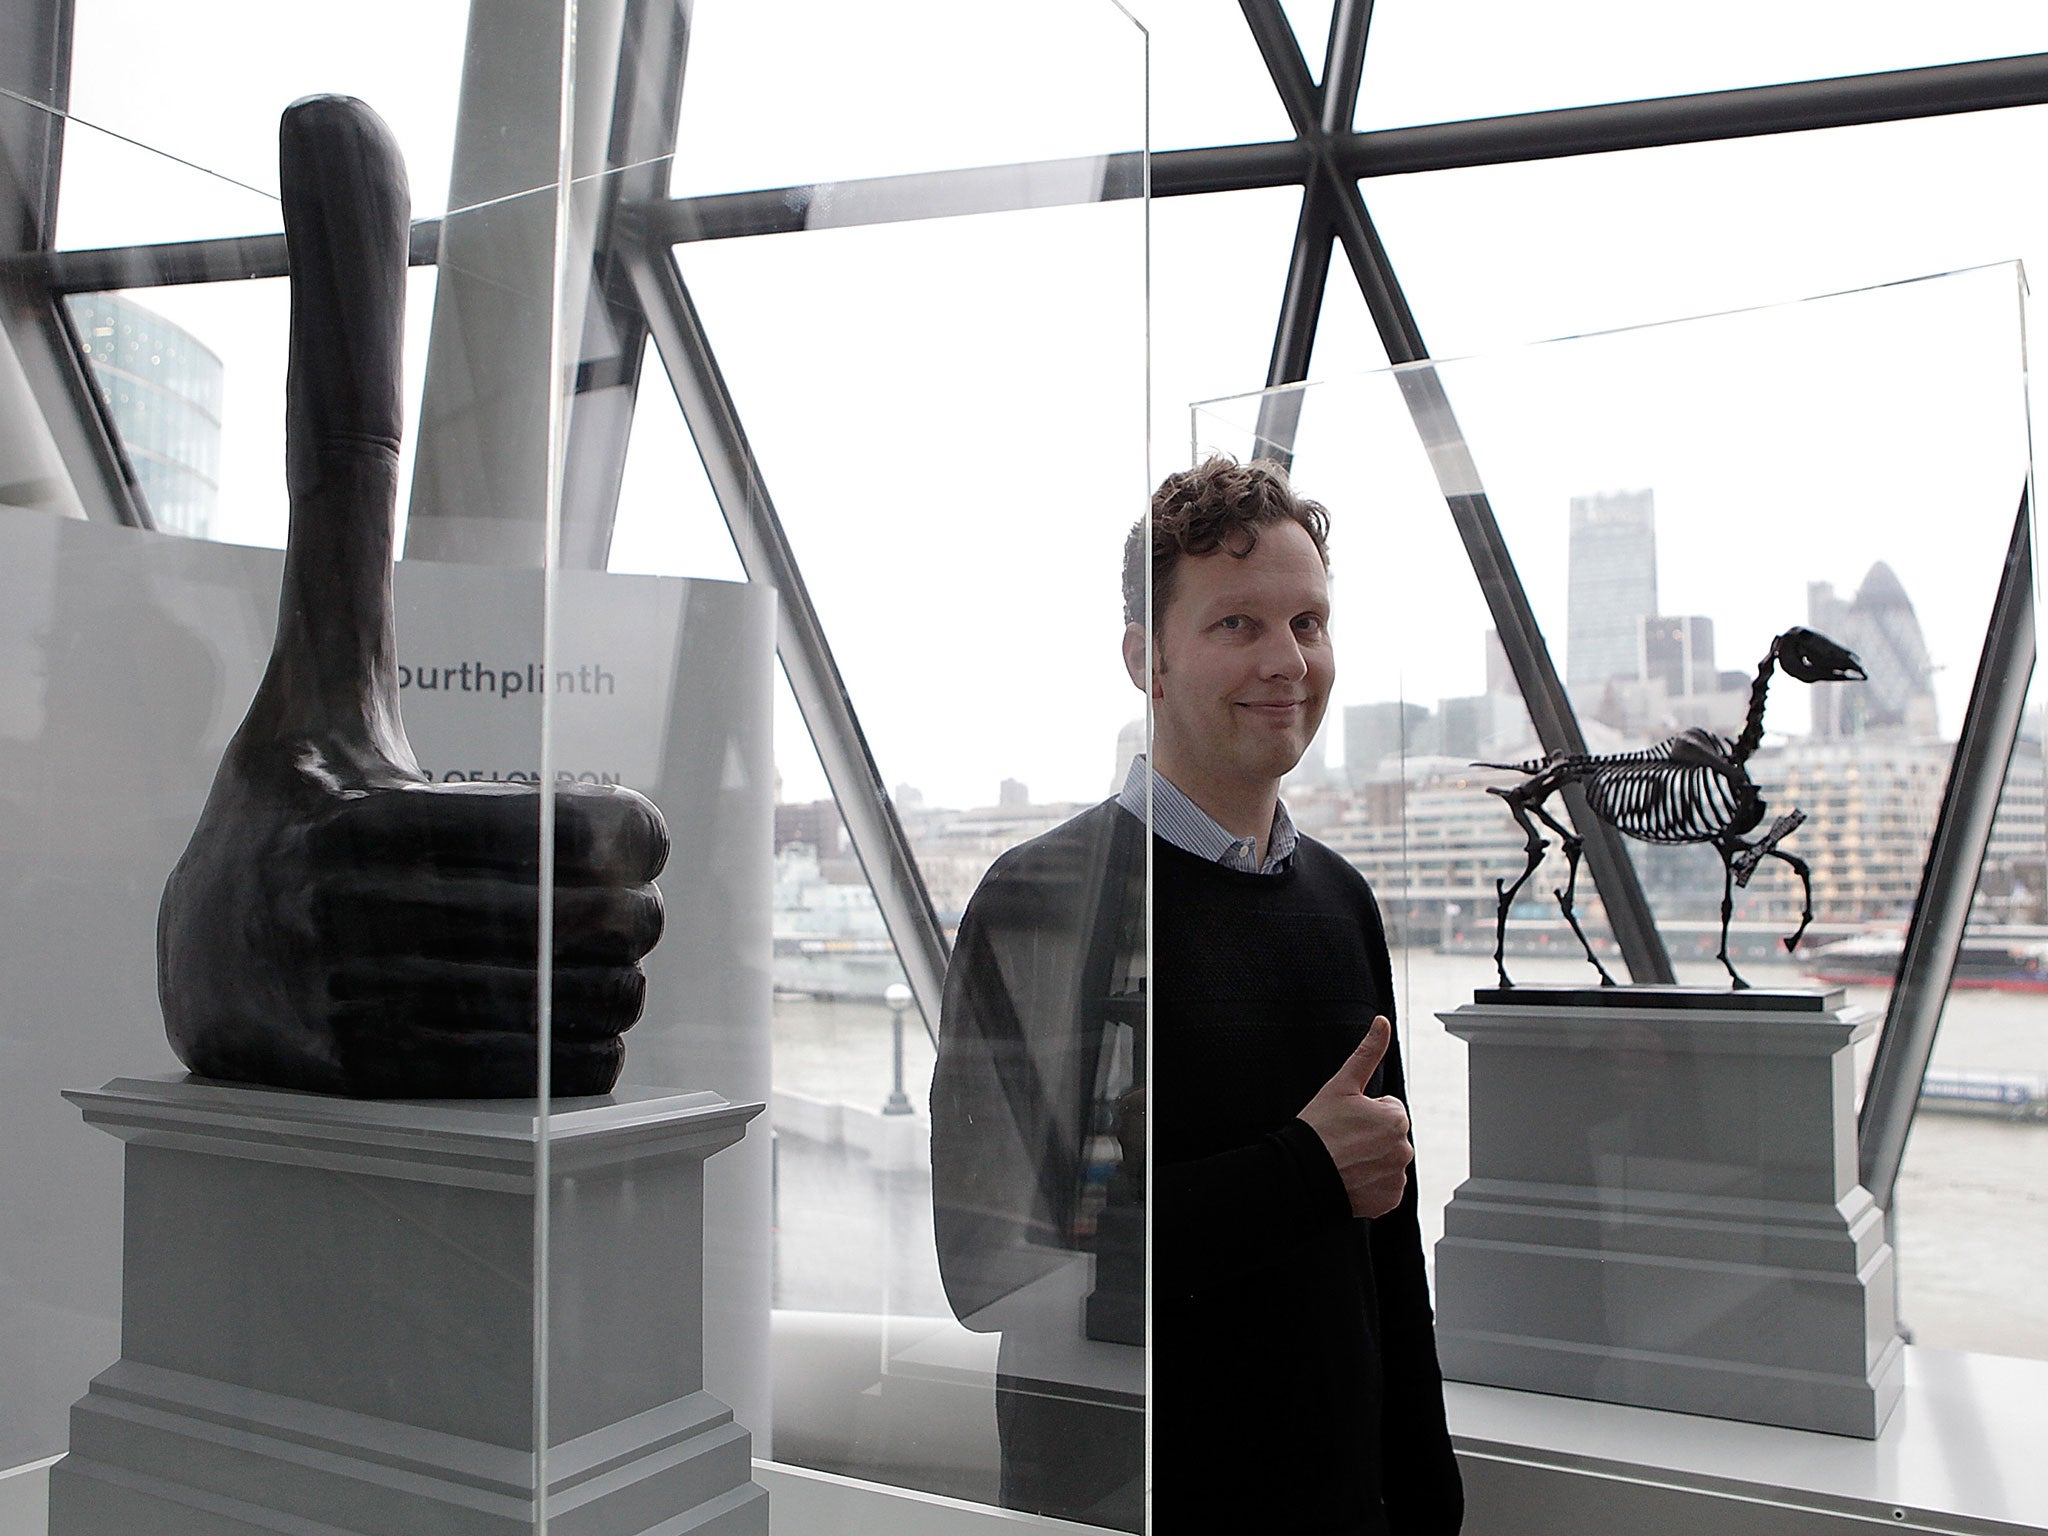 David Shrigley with a maquette of his sculpture 'Really Good' which has been chosen to stand on Trafalgar Square's Fourth Plinth in 2016